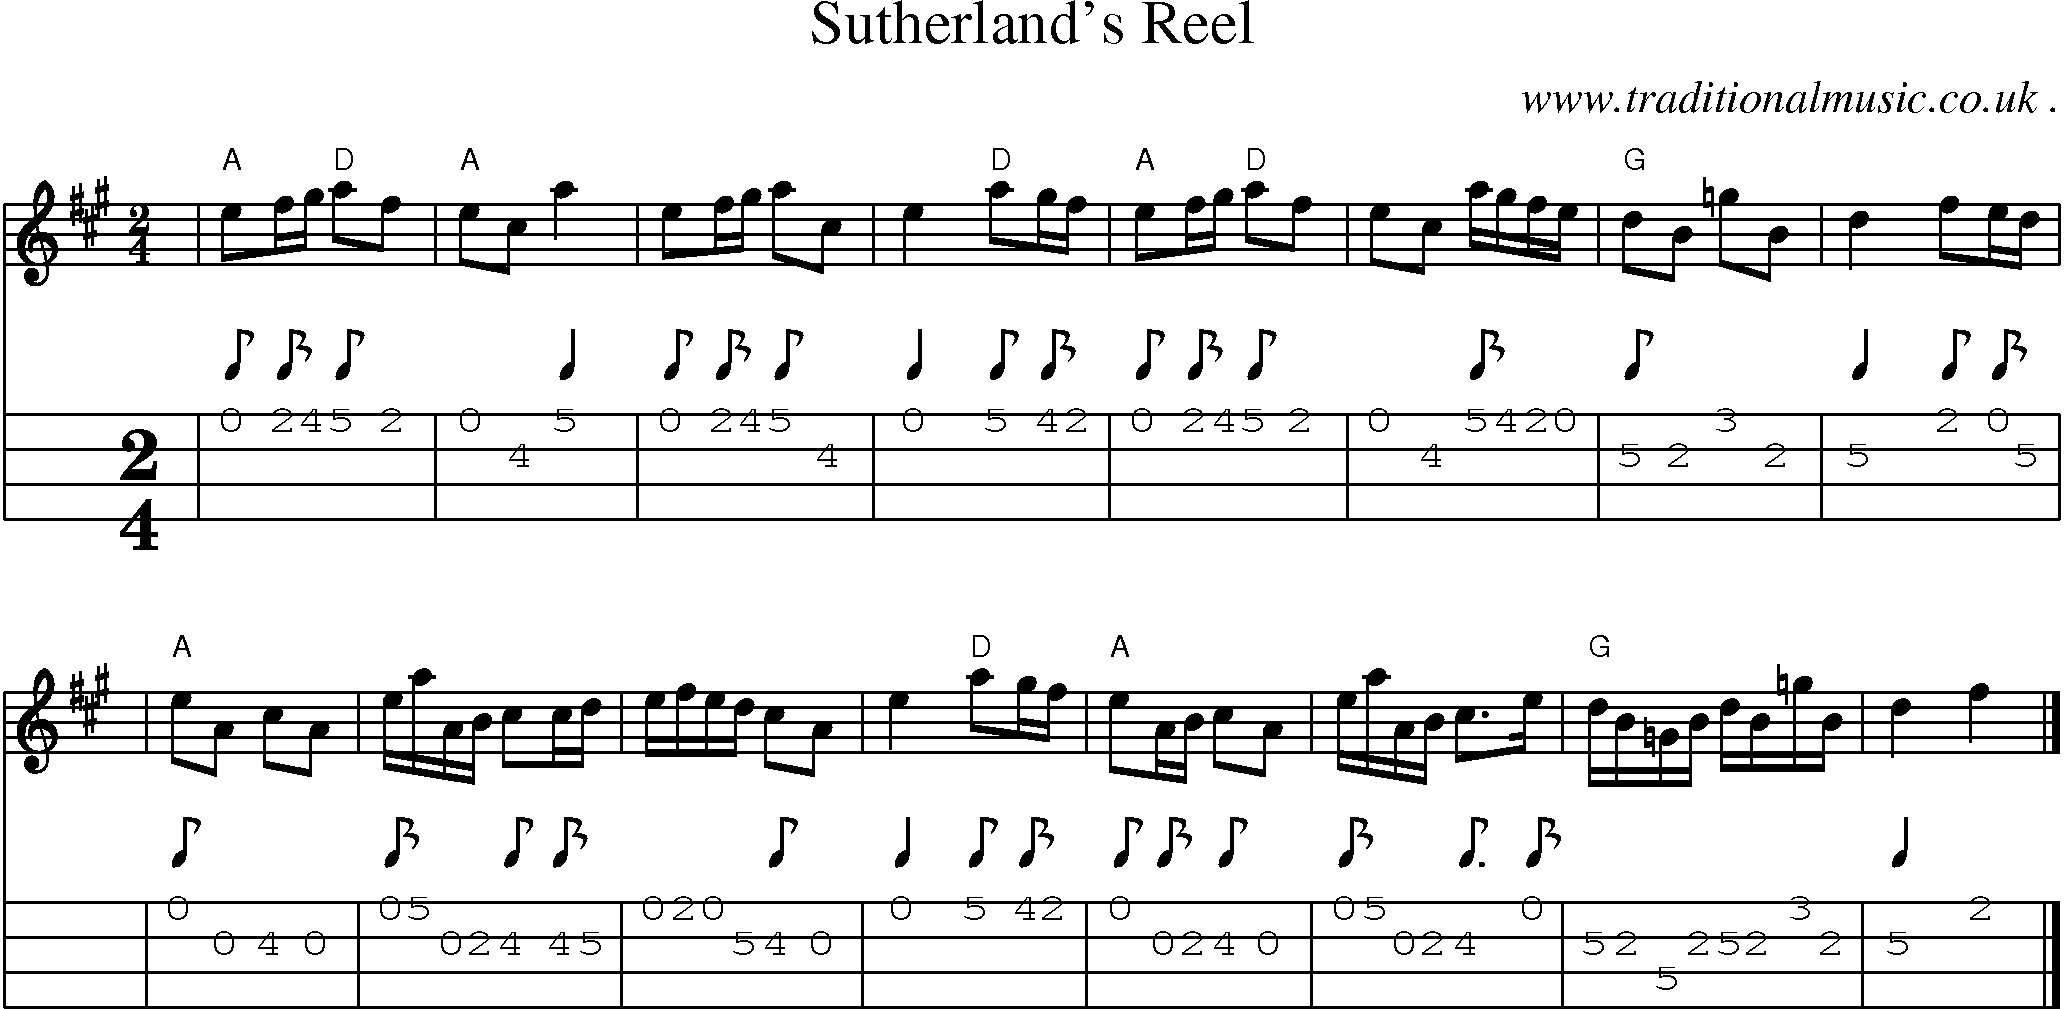 Sheet-music  score, Chords and Mandolin Tabs for Sutherlands Reel